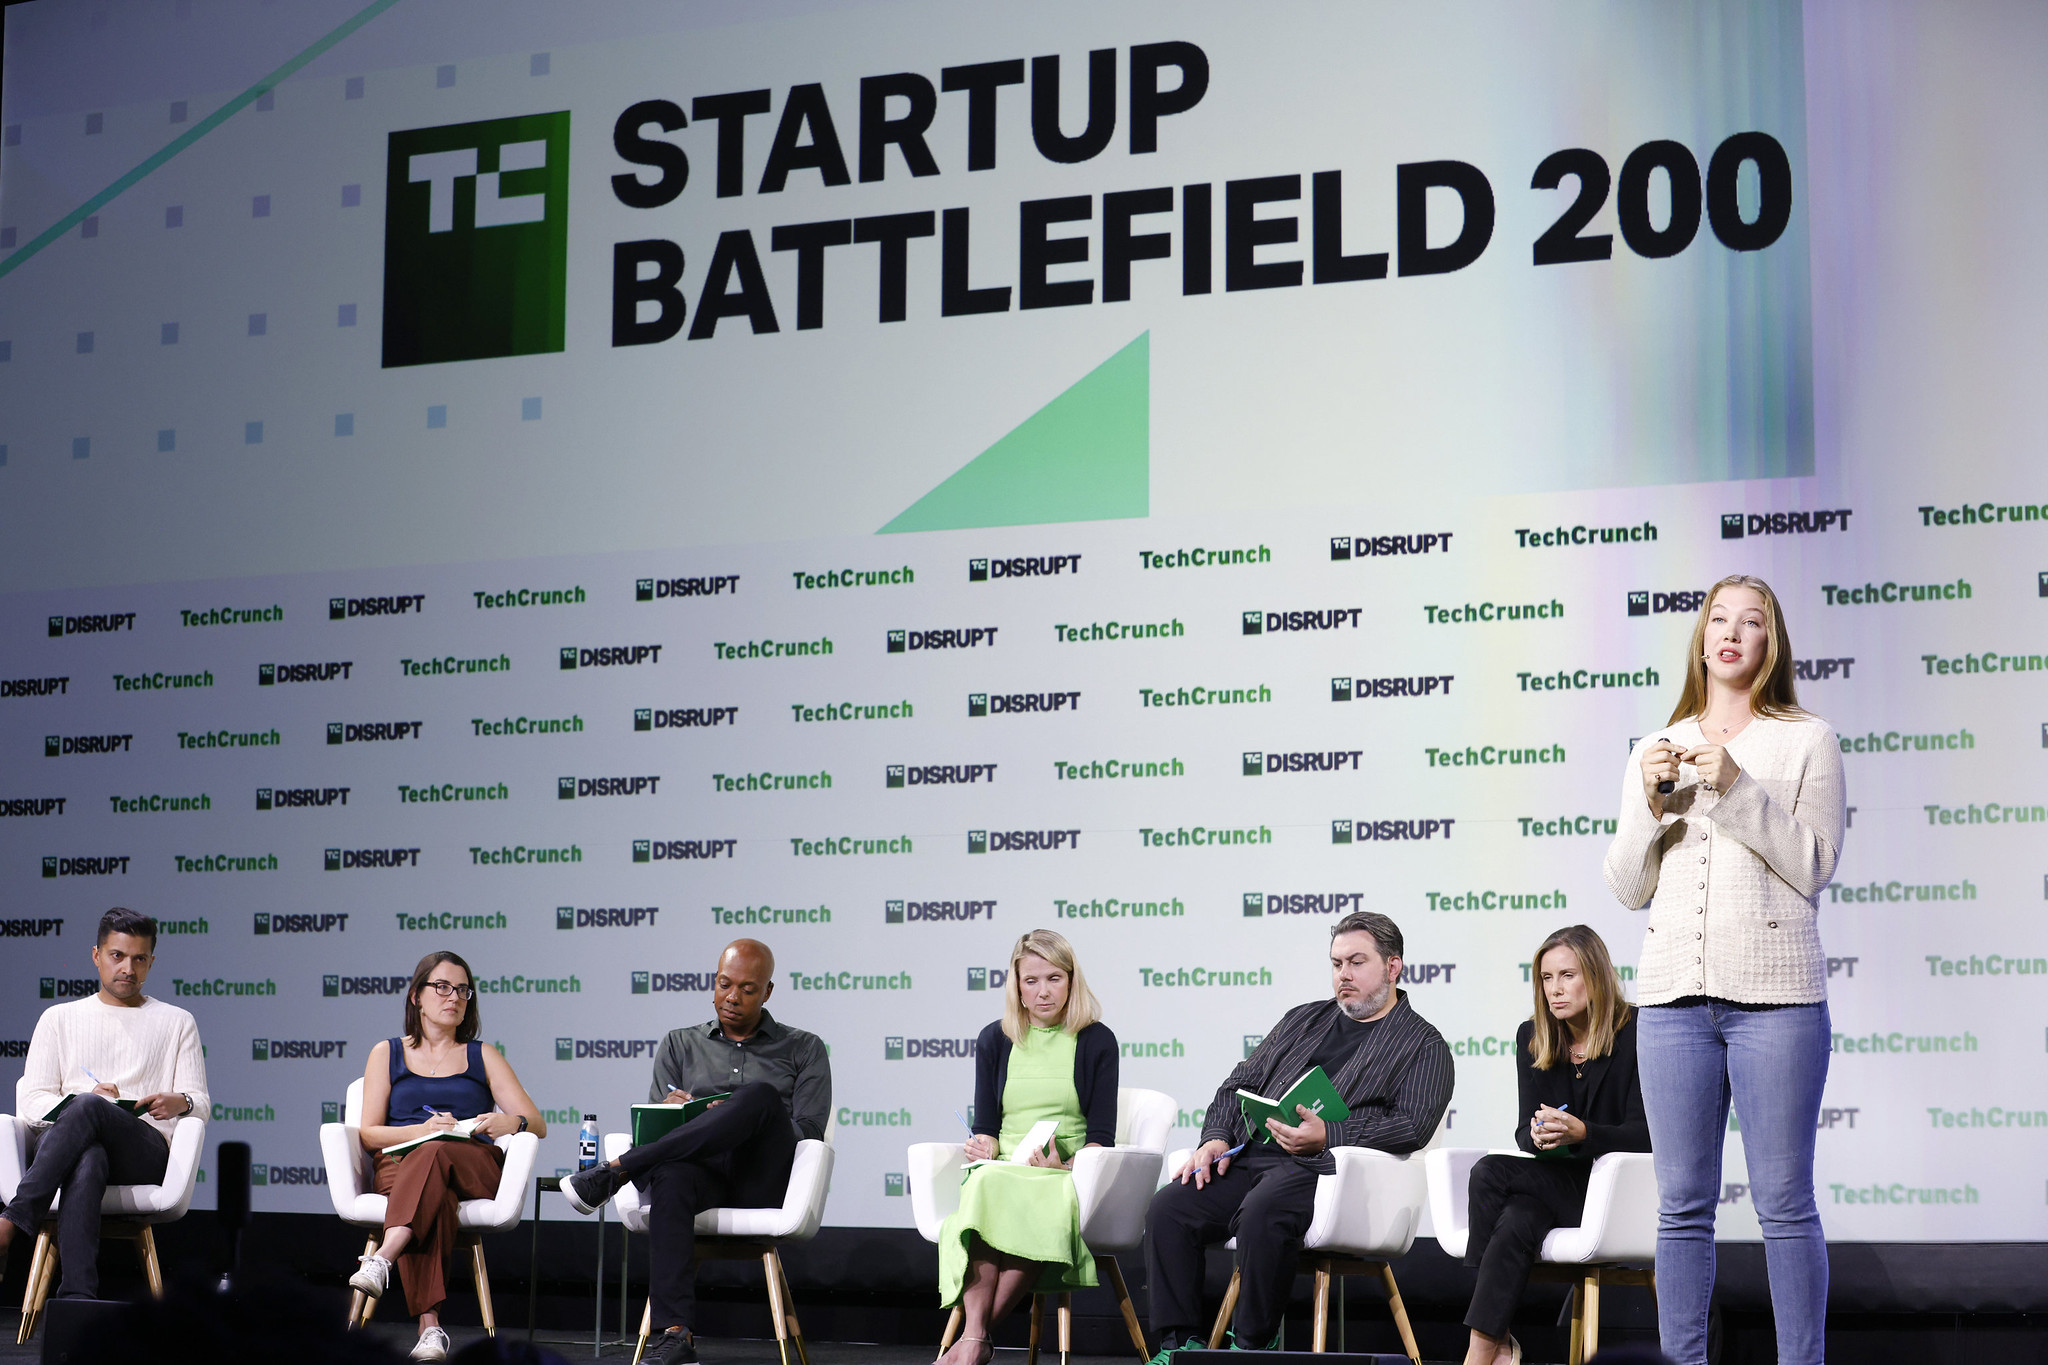 techcrunch.com - Neesha A. Tambe - TC Startup Battlefield master class with Canvas Ventures: Creating strategic defensibility as an early-stage startup